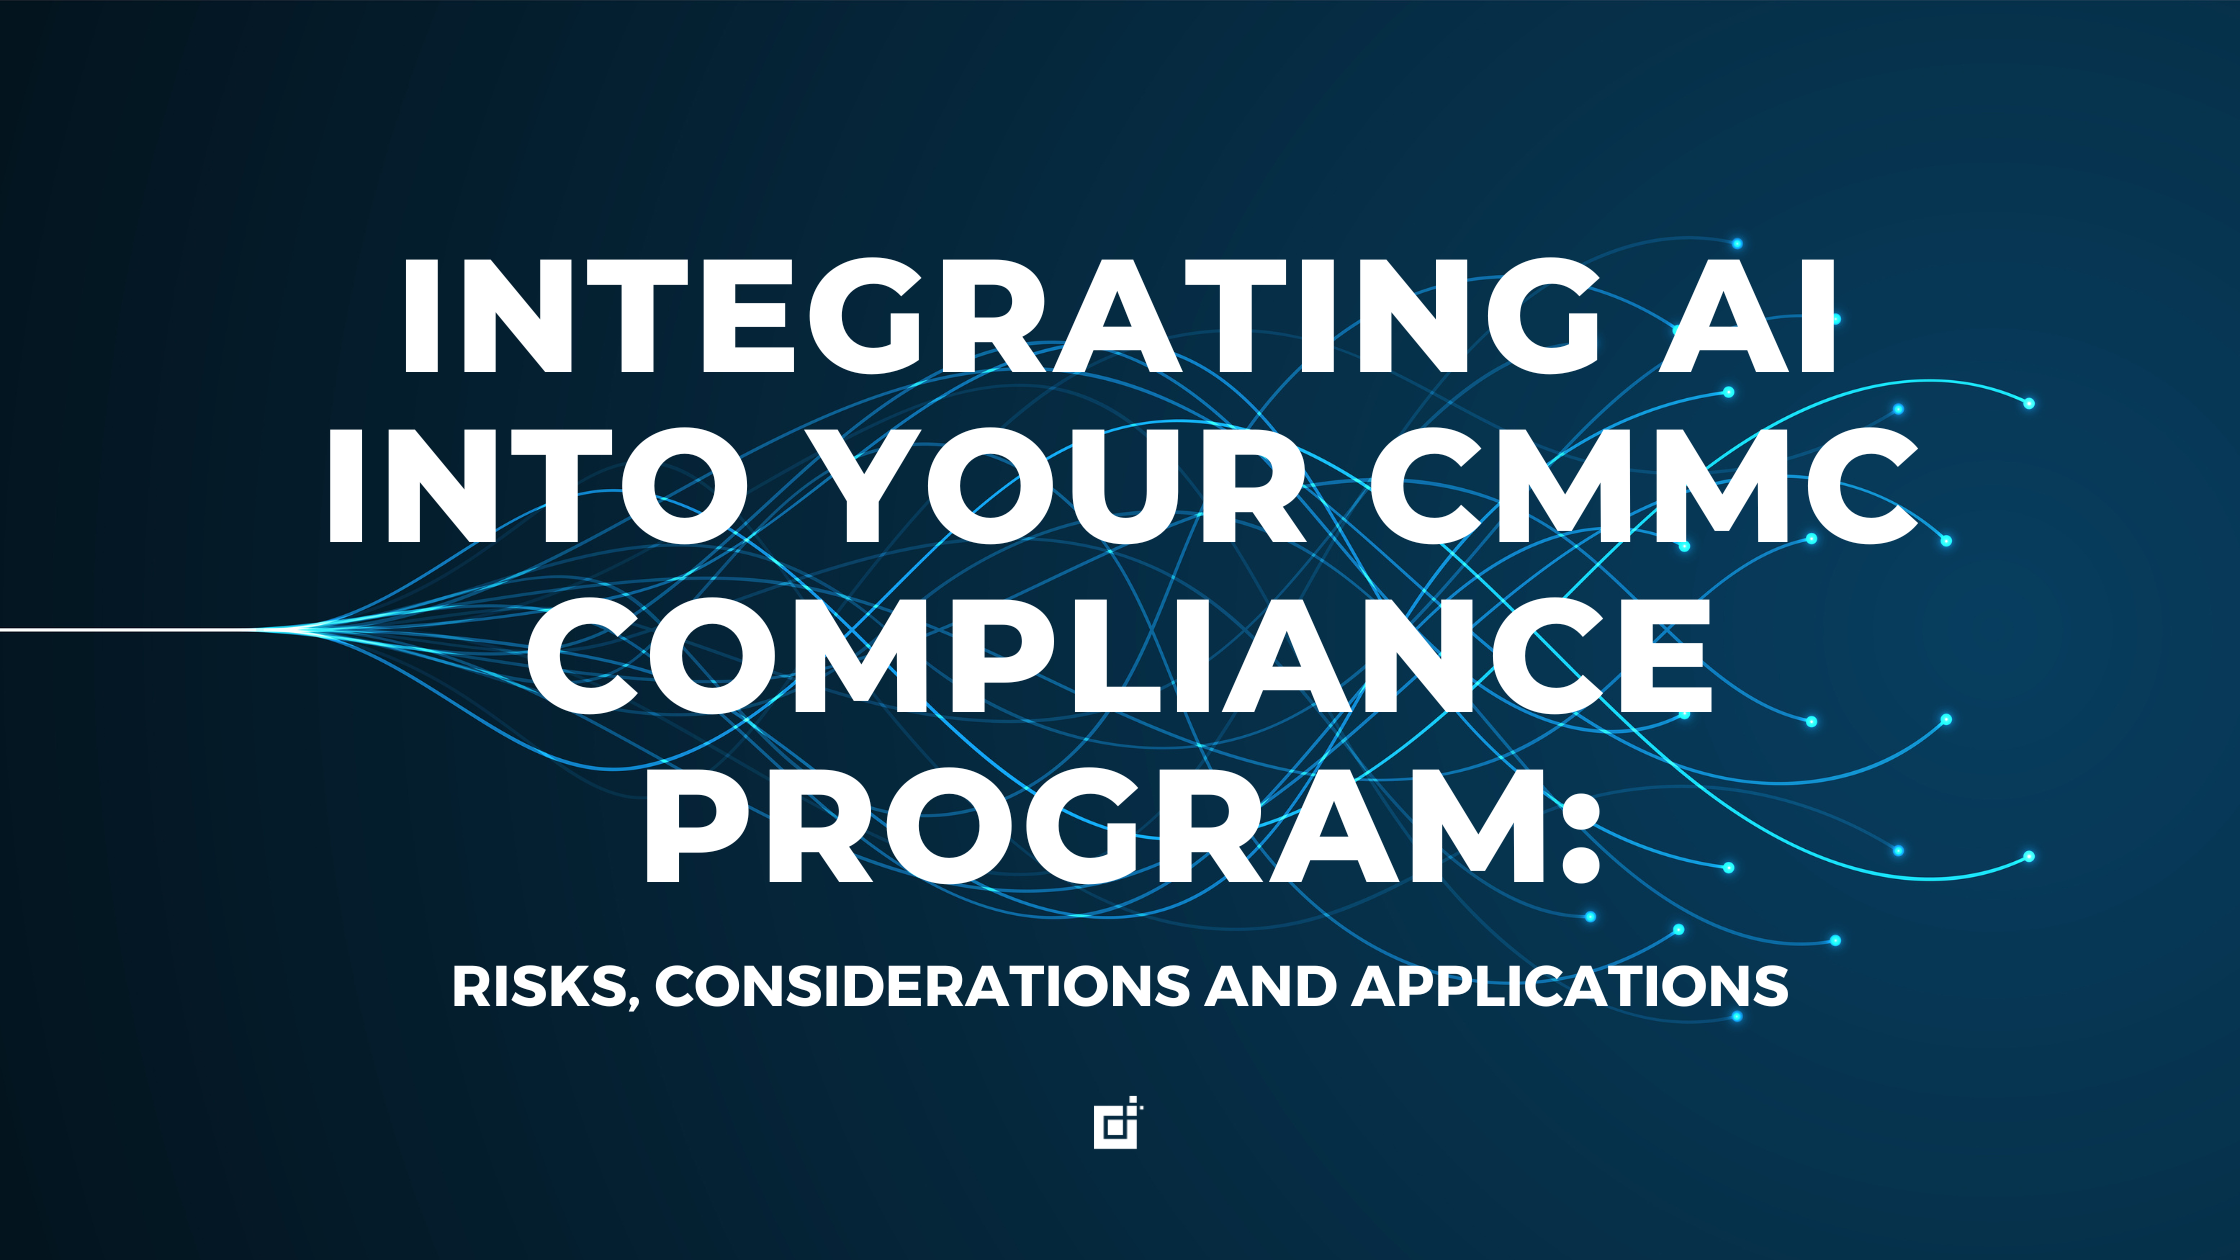 Integrating AI Into Your CMMC Compliance Program: The Risks, Considerations and Applications